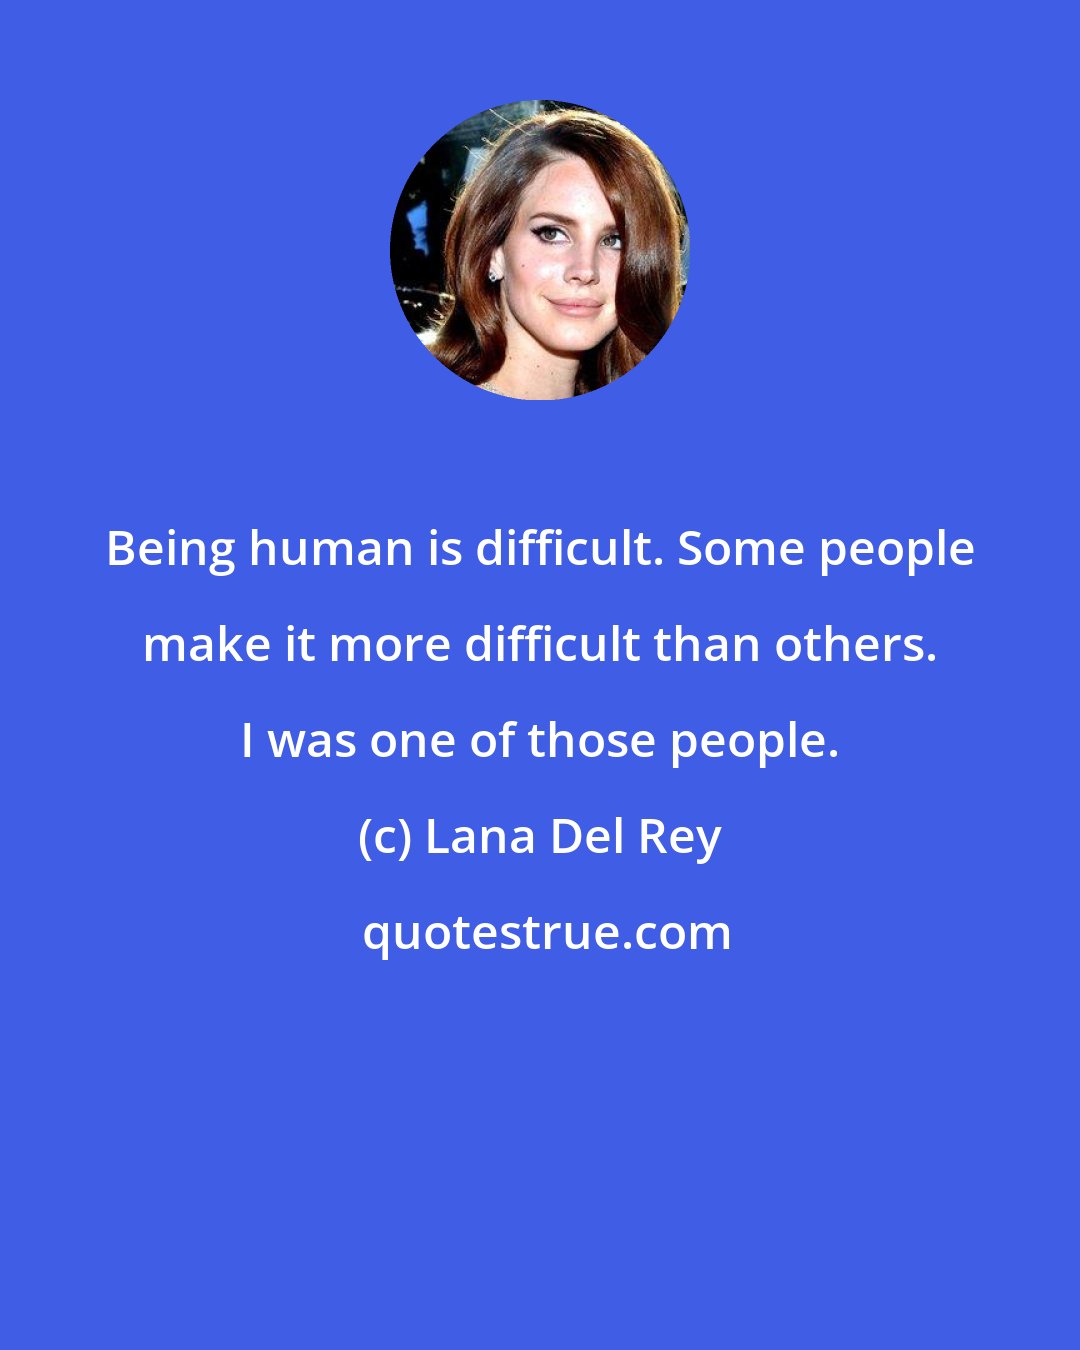 Lana Del Rey: Being human is difficult. Some people make it more difficult than others. I was one of those people.